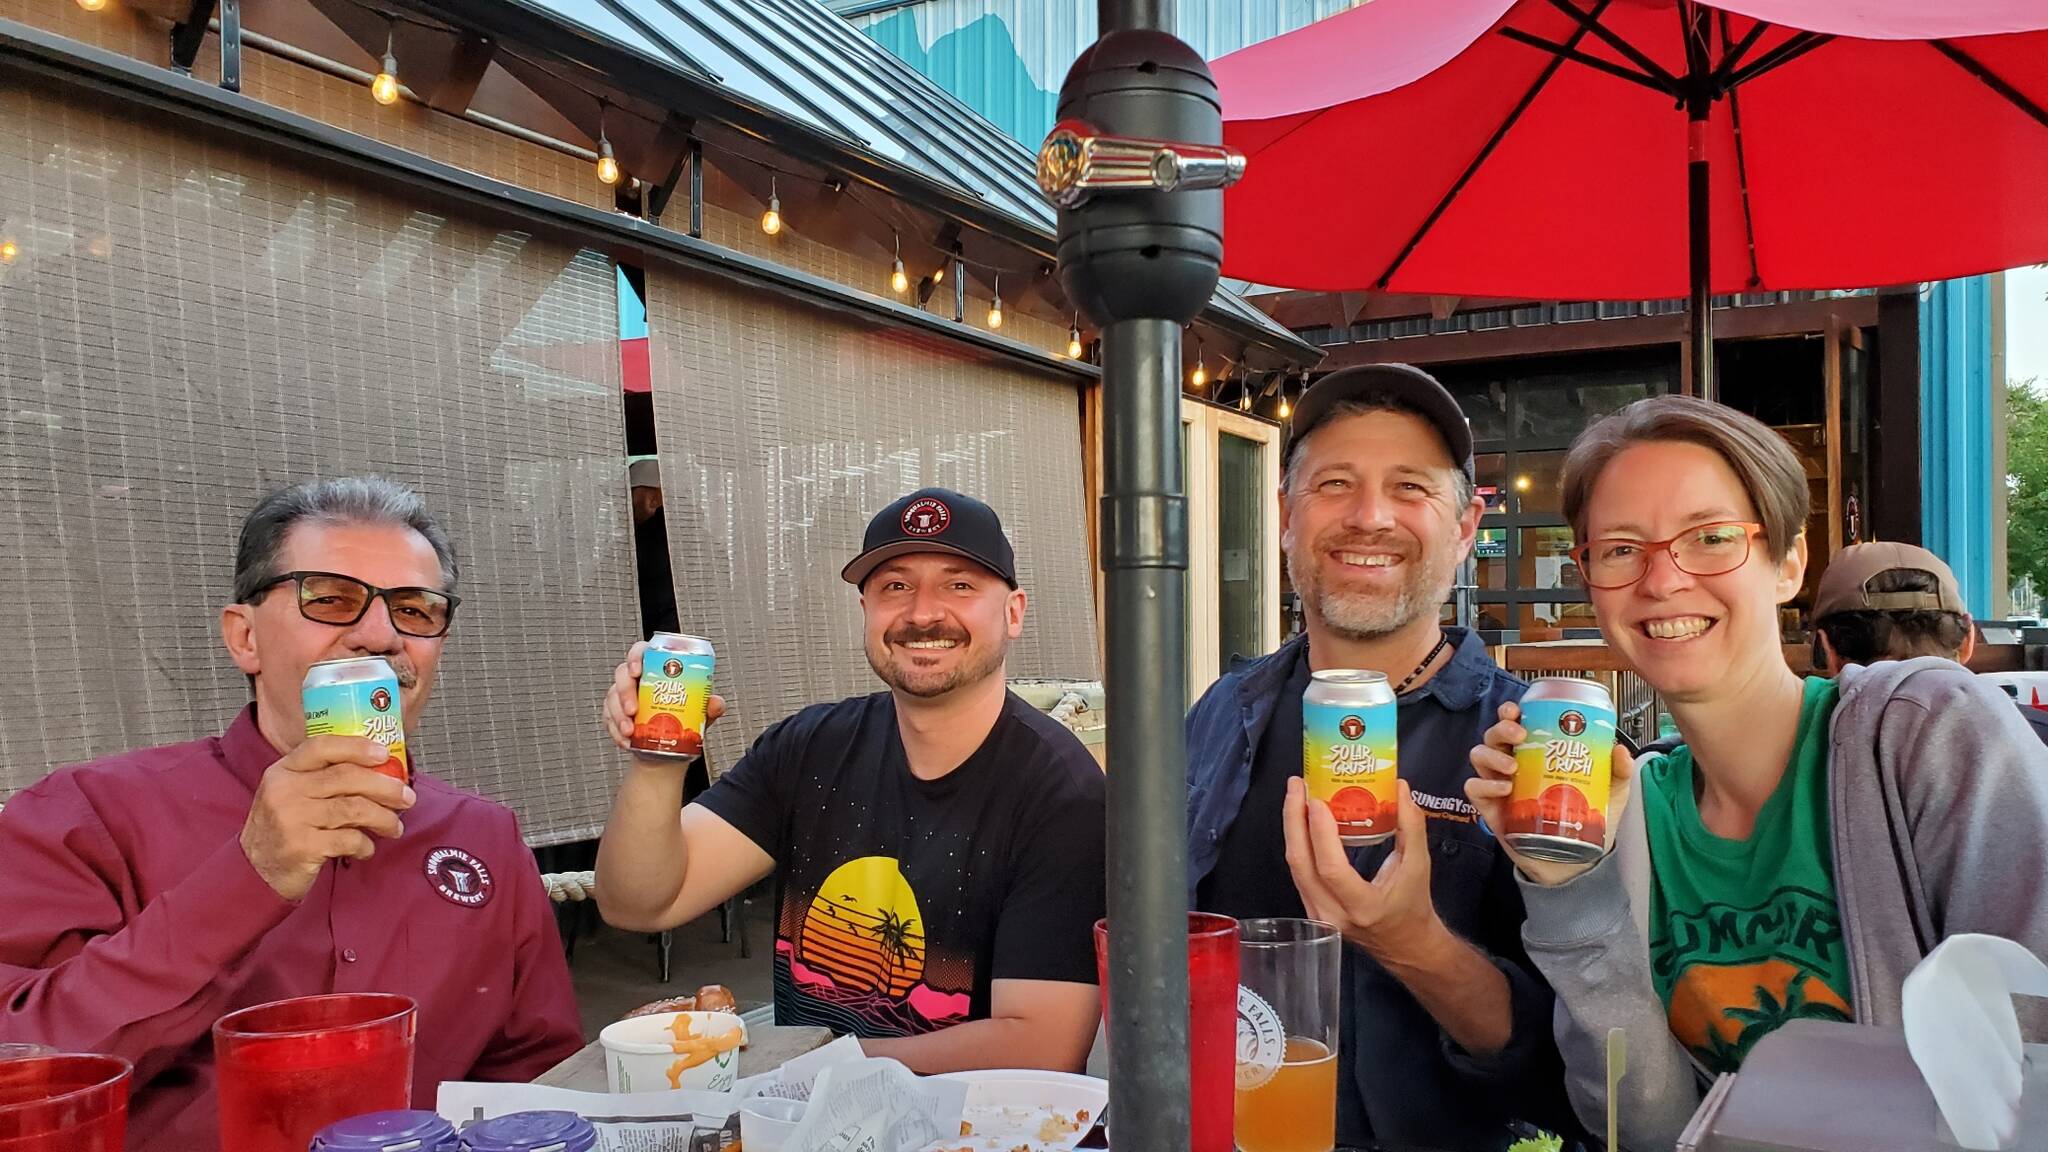 From left to right: Snoqualmie Falls Brewery owner Voyislav Kokeza, front of house manager Aleks Kokeza, Sunergy Systems Founder Howard Lamb and system sales assistant Jaime Sasse. Photo courtesy of Sunergy Systems